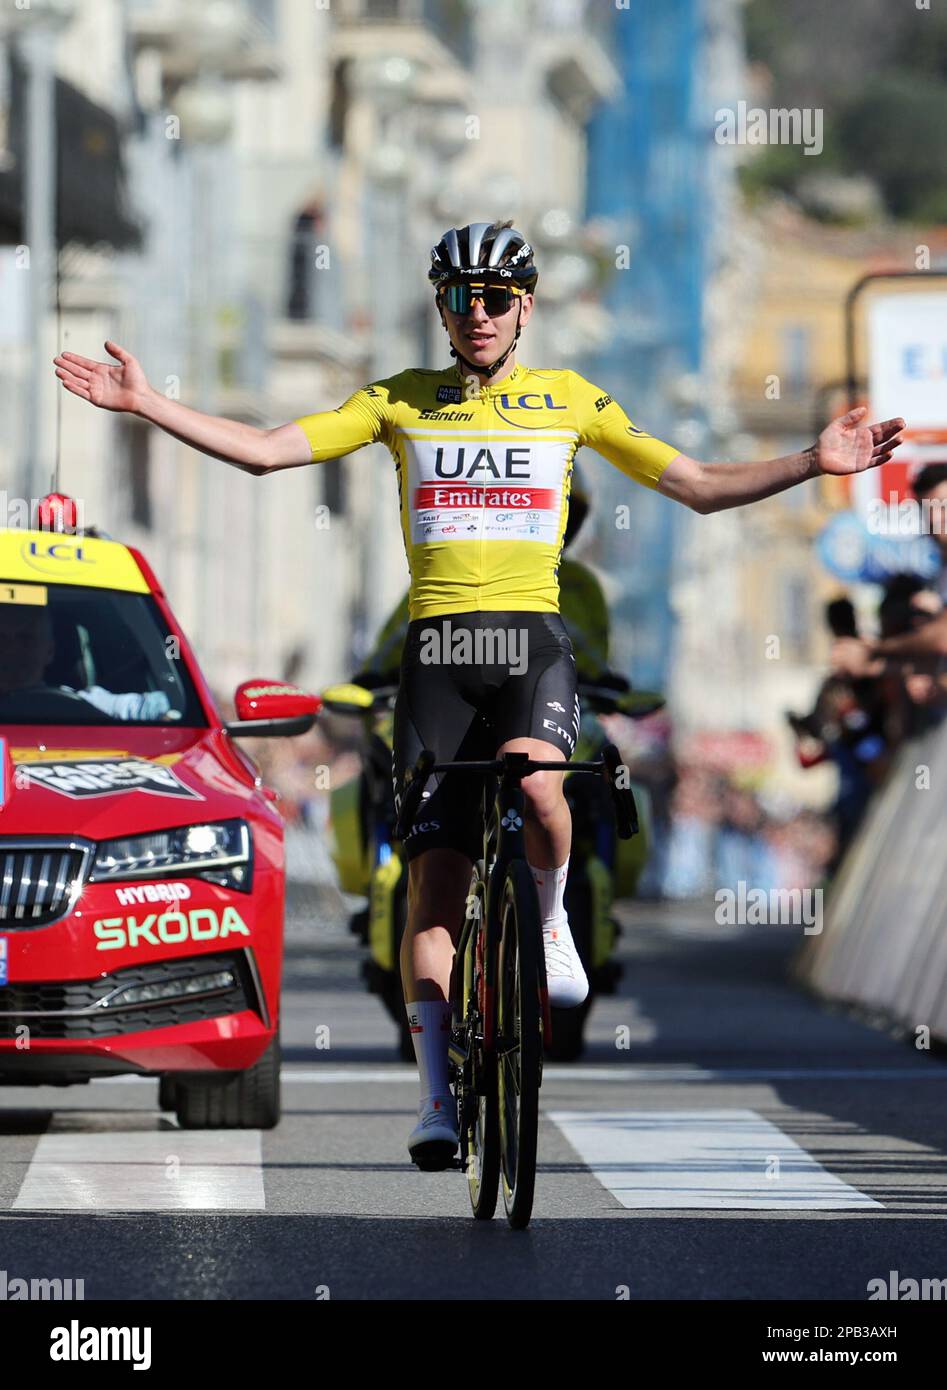 Slovenian Tadej Pogacar of UAE Team Emirates celebrates as he crosses the finish line to win stage 8, the final stage of the 81st edition of the Paris -Nice eight days cycling race,